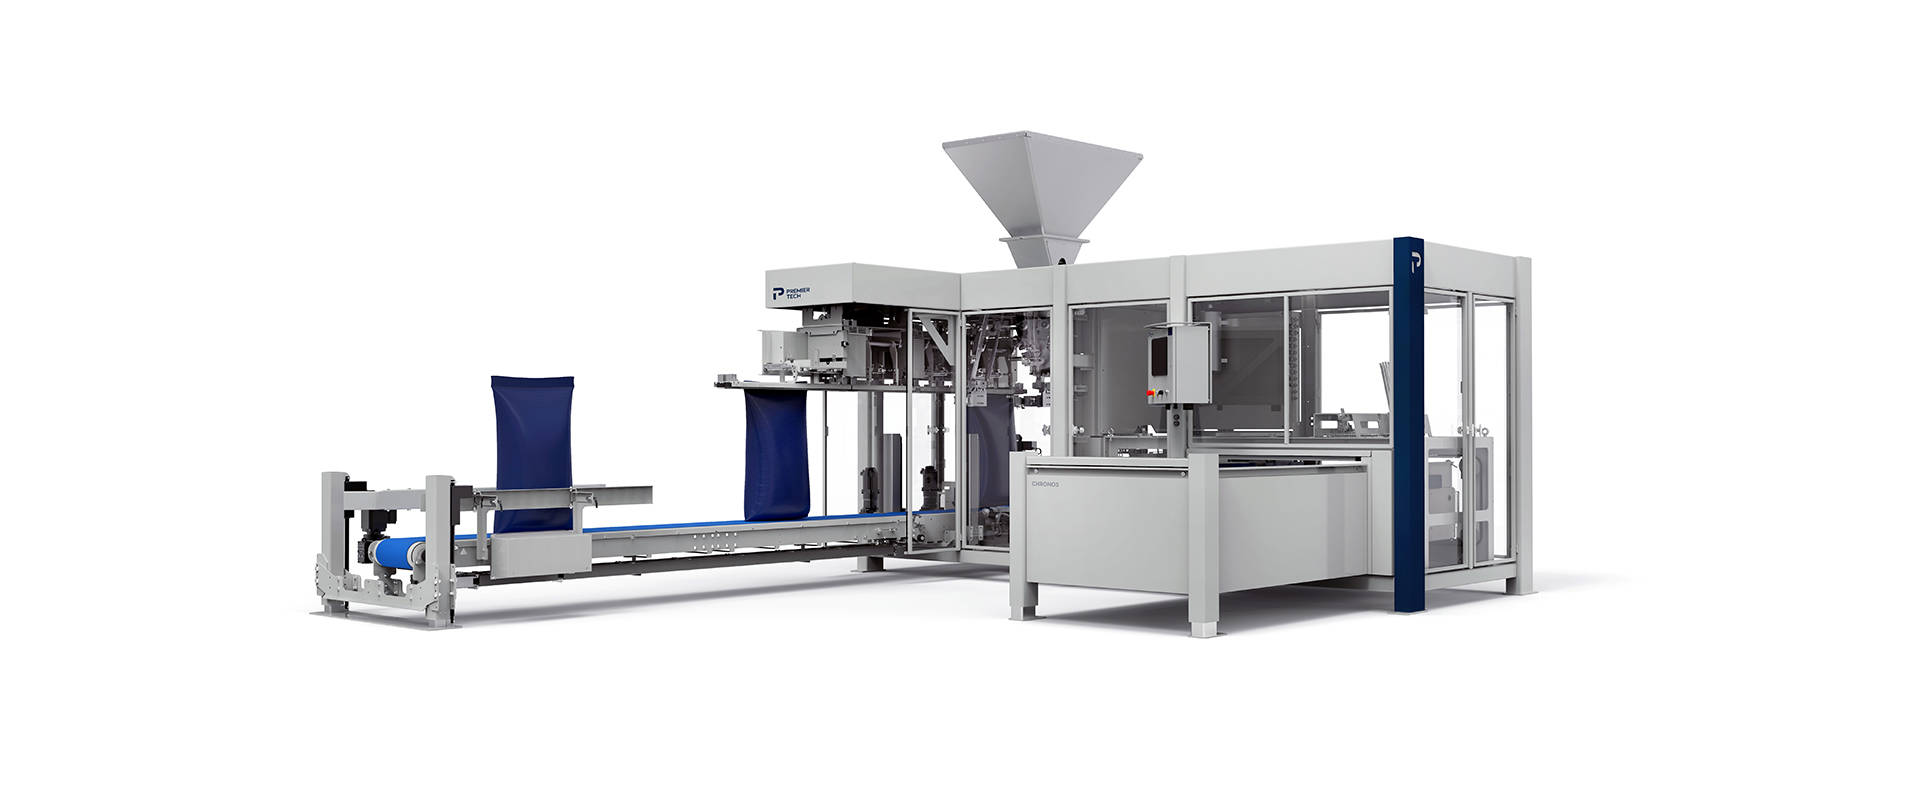 Automatic Bagging Machine | Bag size up to 20 lbs| Concetti